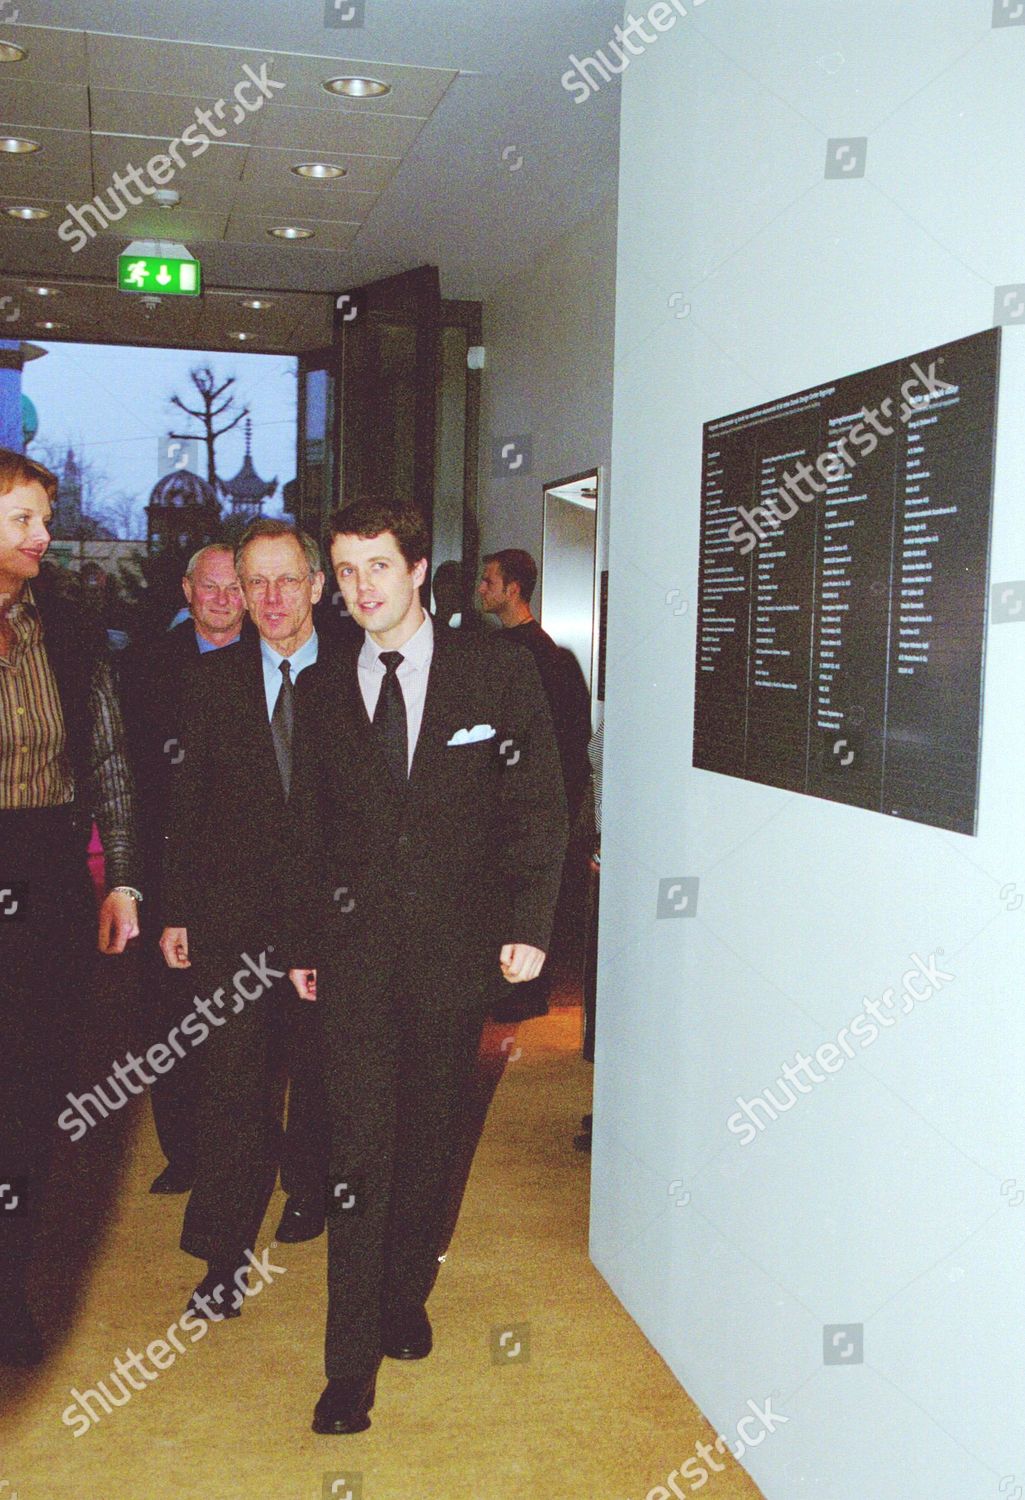 crown-prince-frederik-opening-the-never-green-and-ever-green-exhibition-denmark-shutterstock-editorial-376829i.jpg